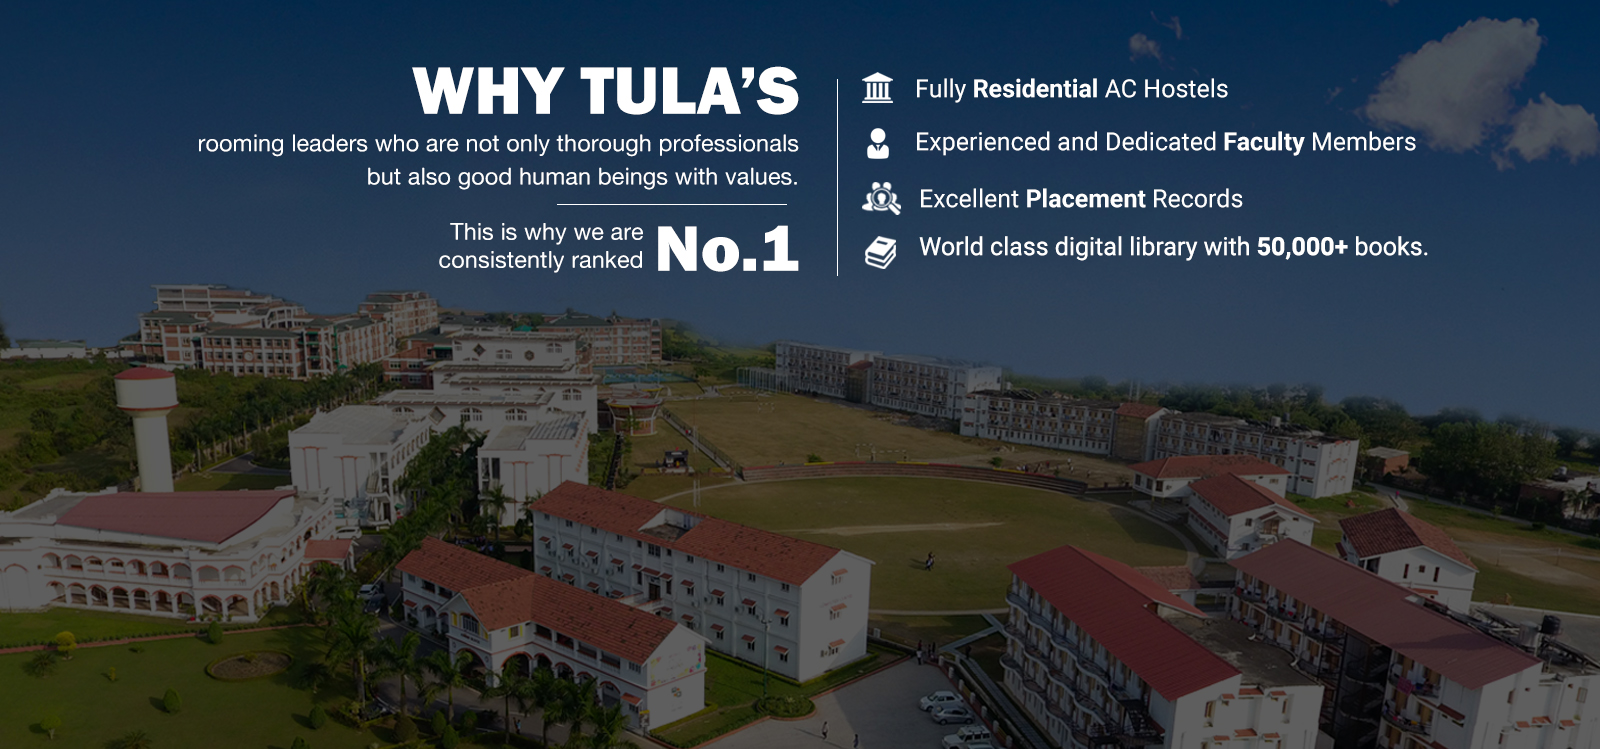 Tula’s Institute of Technology